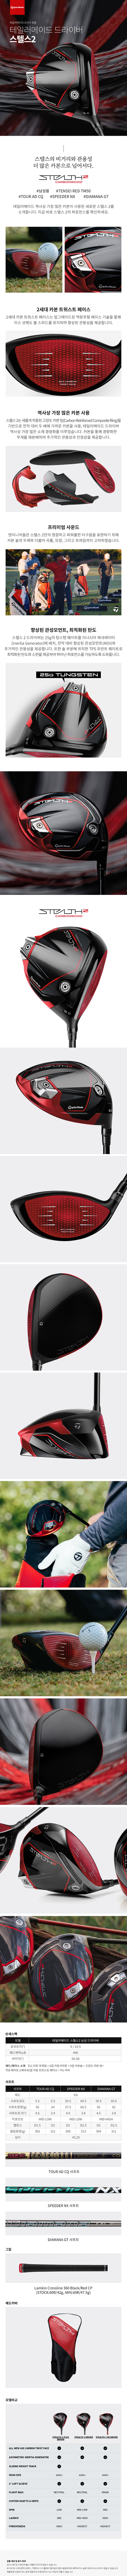 taylormade_stelth2_AMS_driver_23.jpg